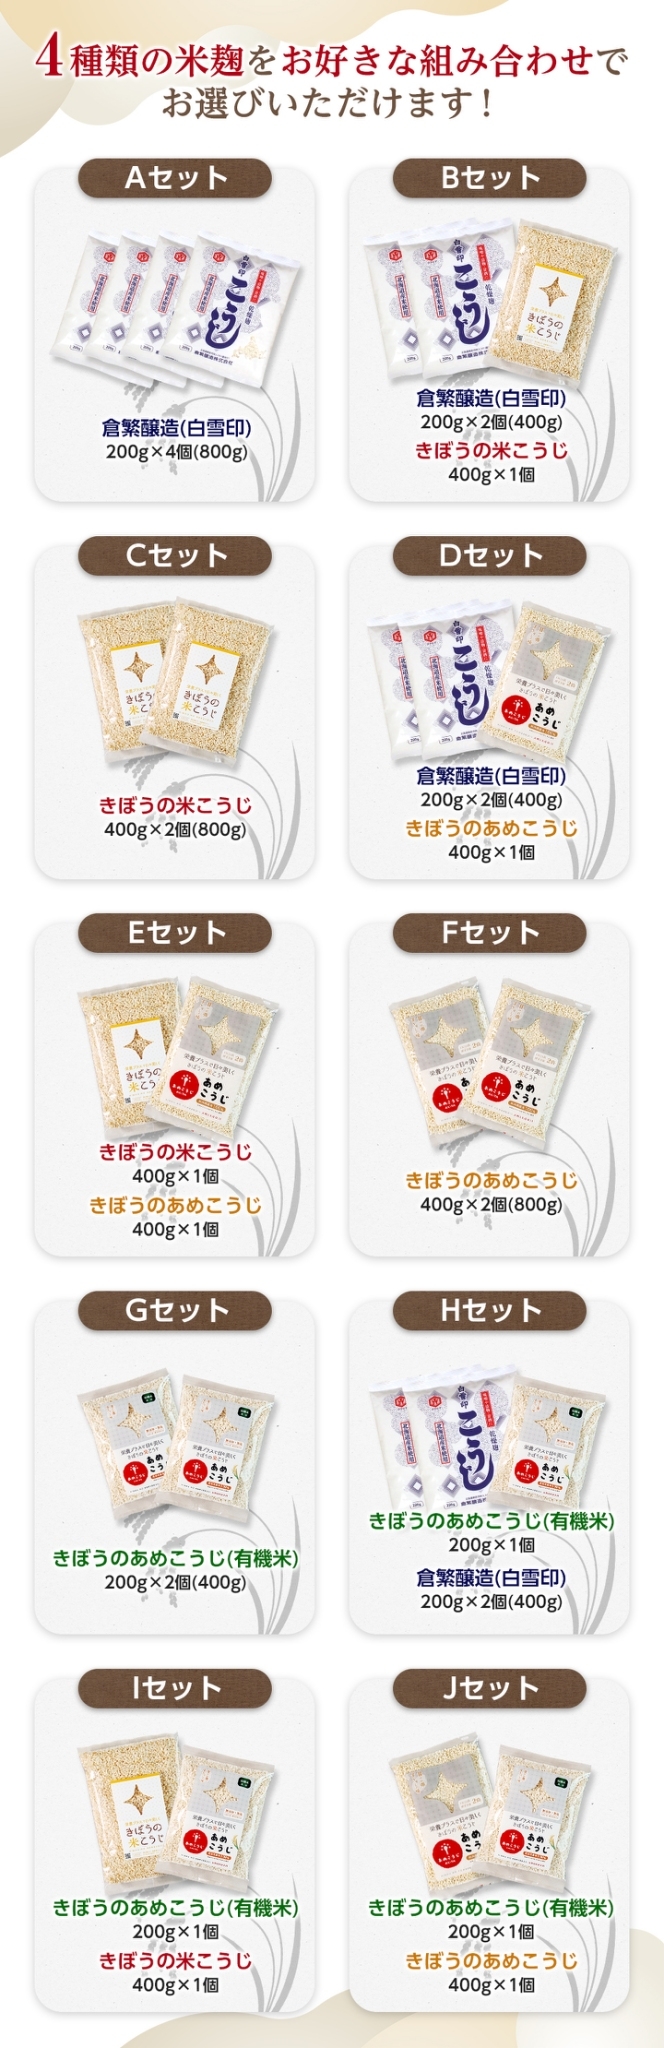  combining free! is possible to choose 4 kind domestic production rice ... small amount .. water dry rice . domestic production rice use sweet sake amazake rice . nonalcohol no addition have machine white snow seal .....